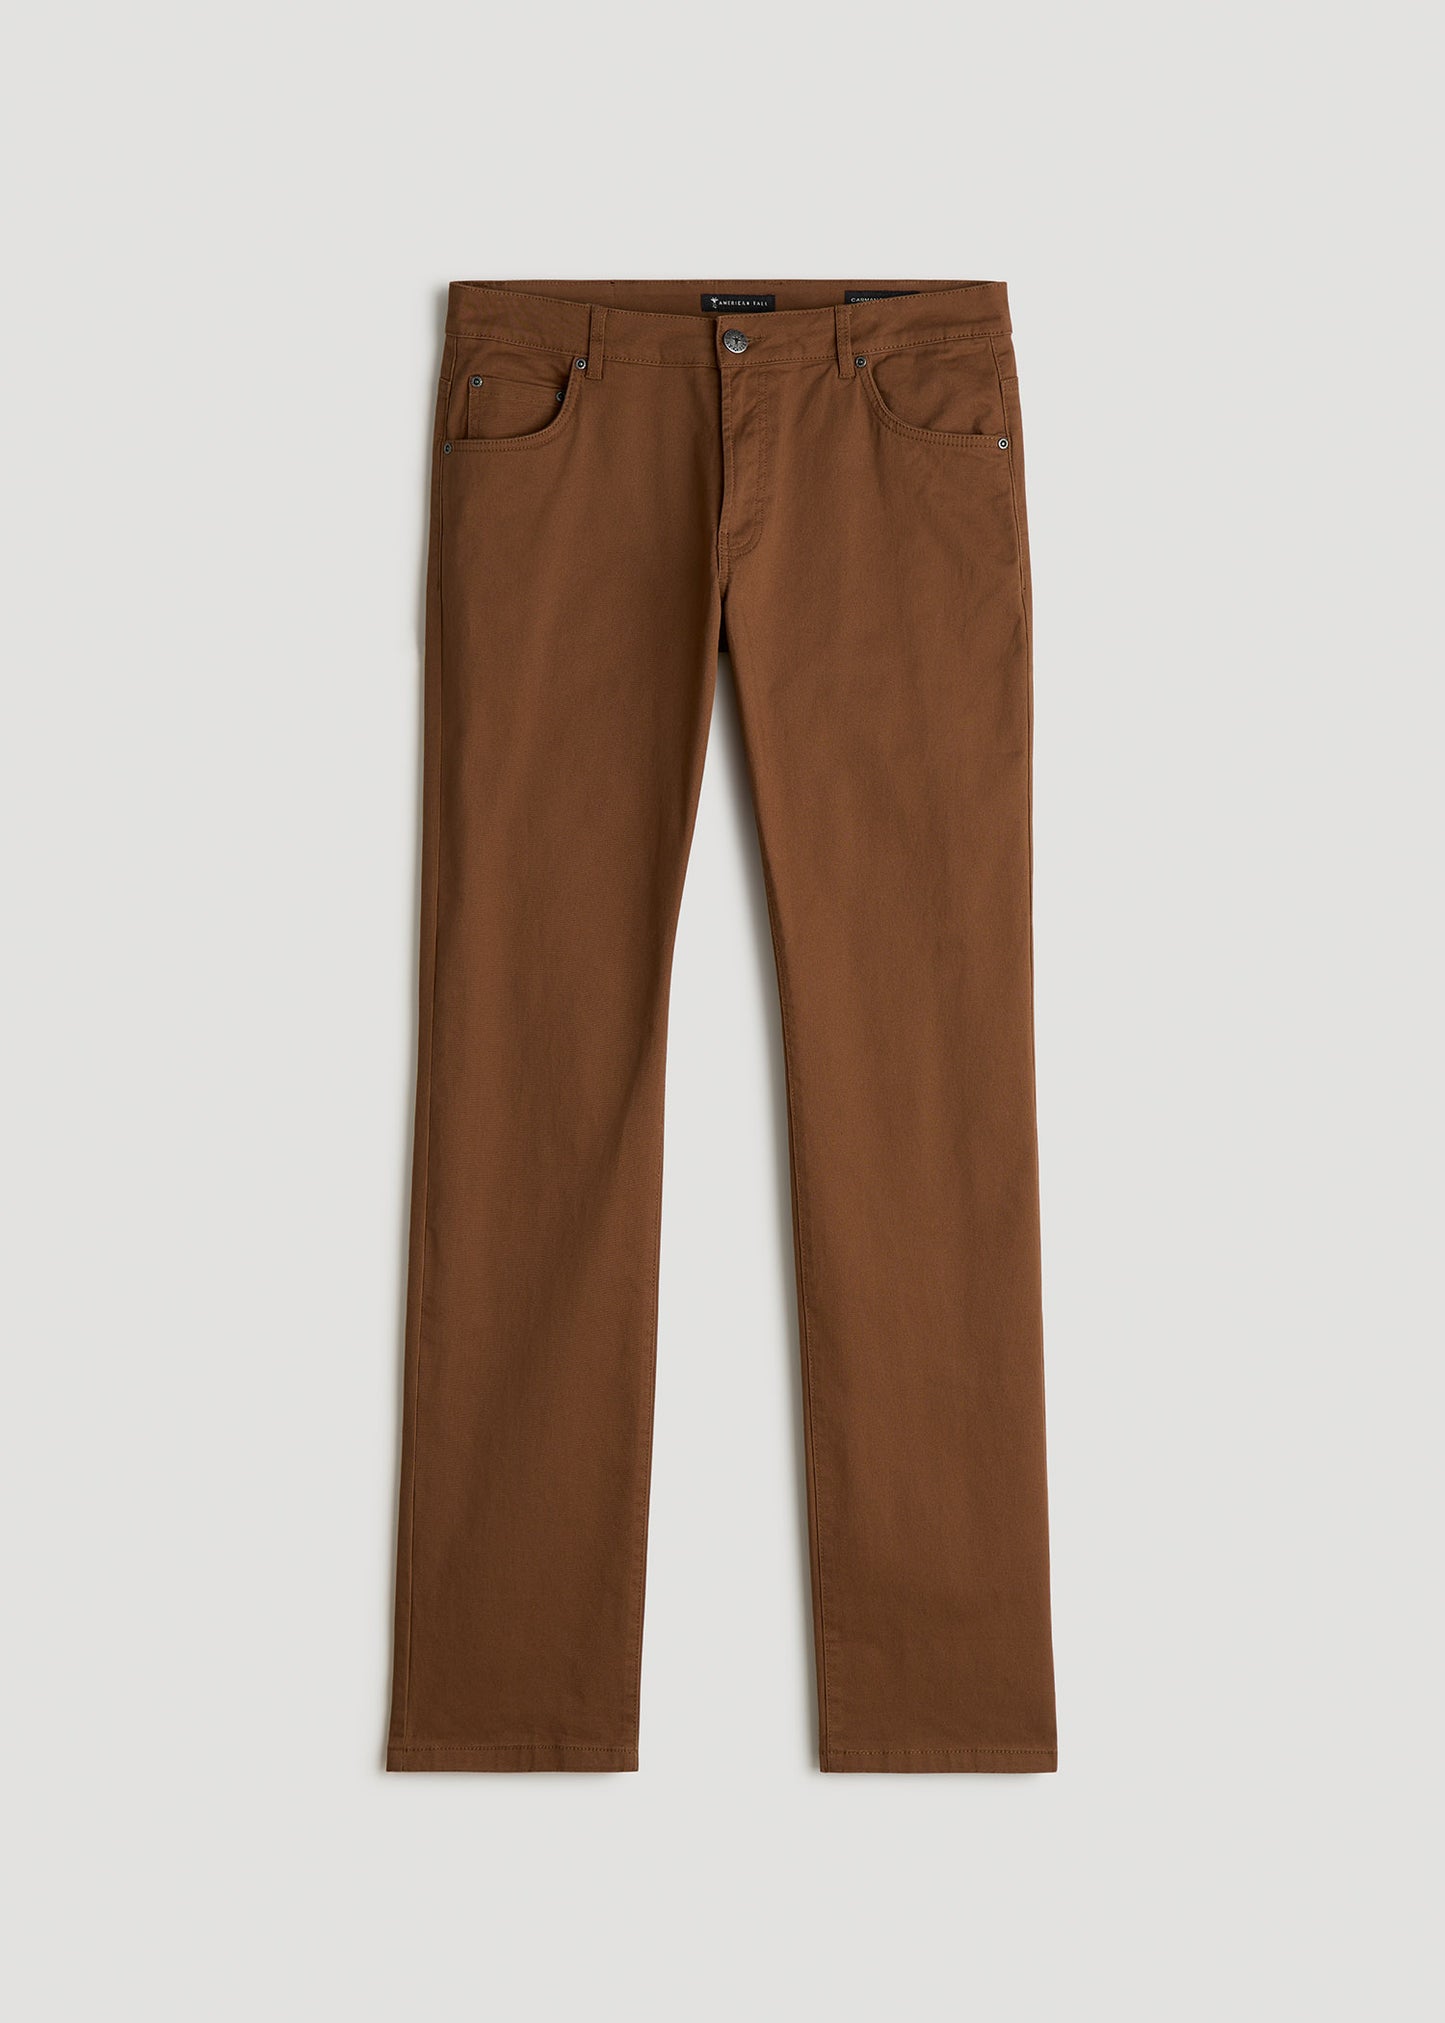 Carman TAPERED Fit Five Pocket Pants for Tall Men in Marine Navy